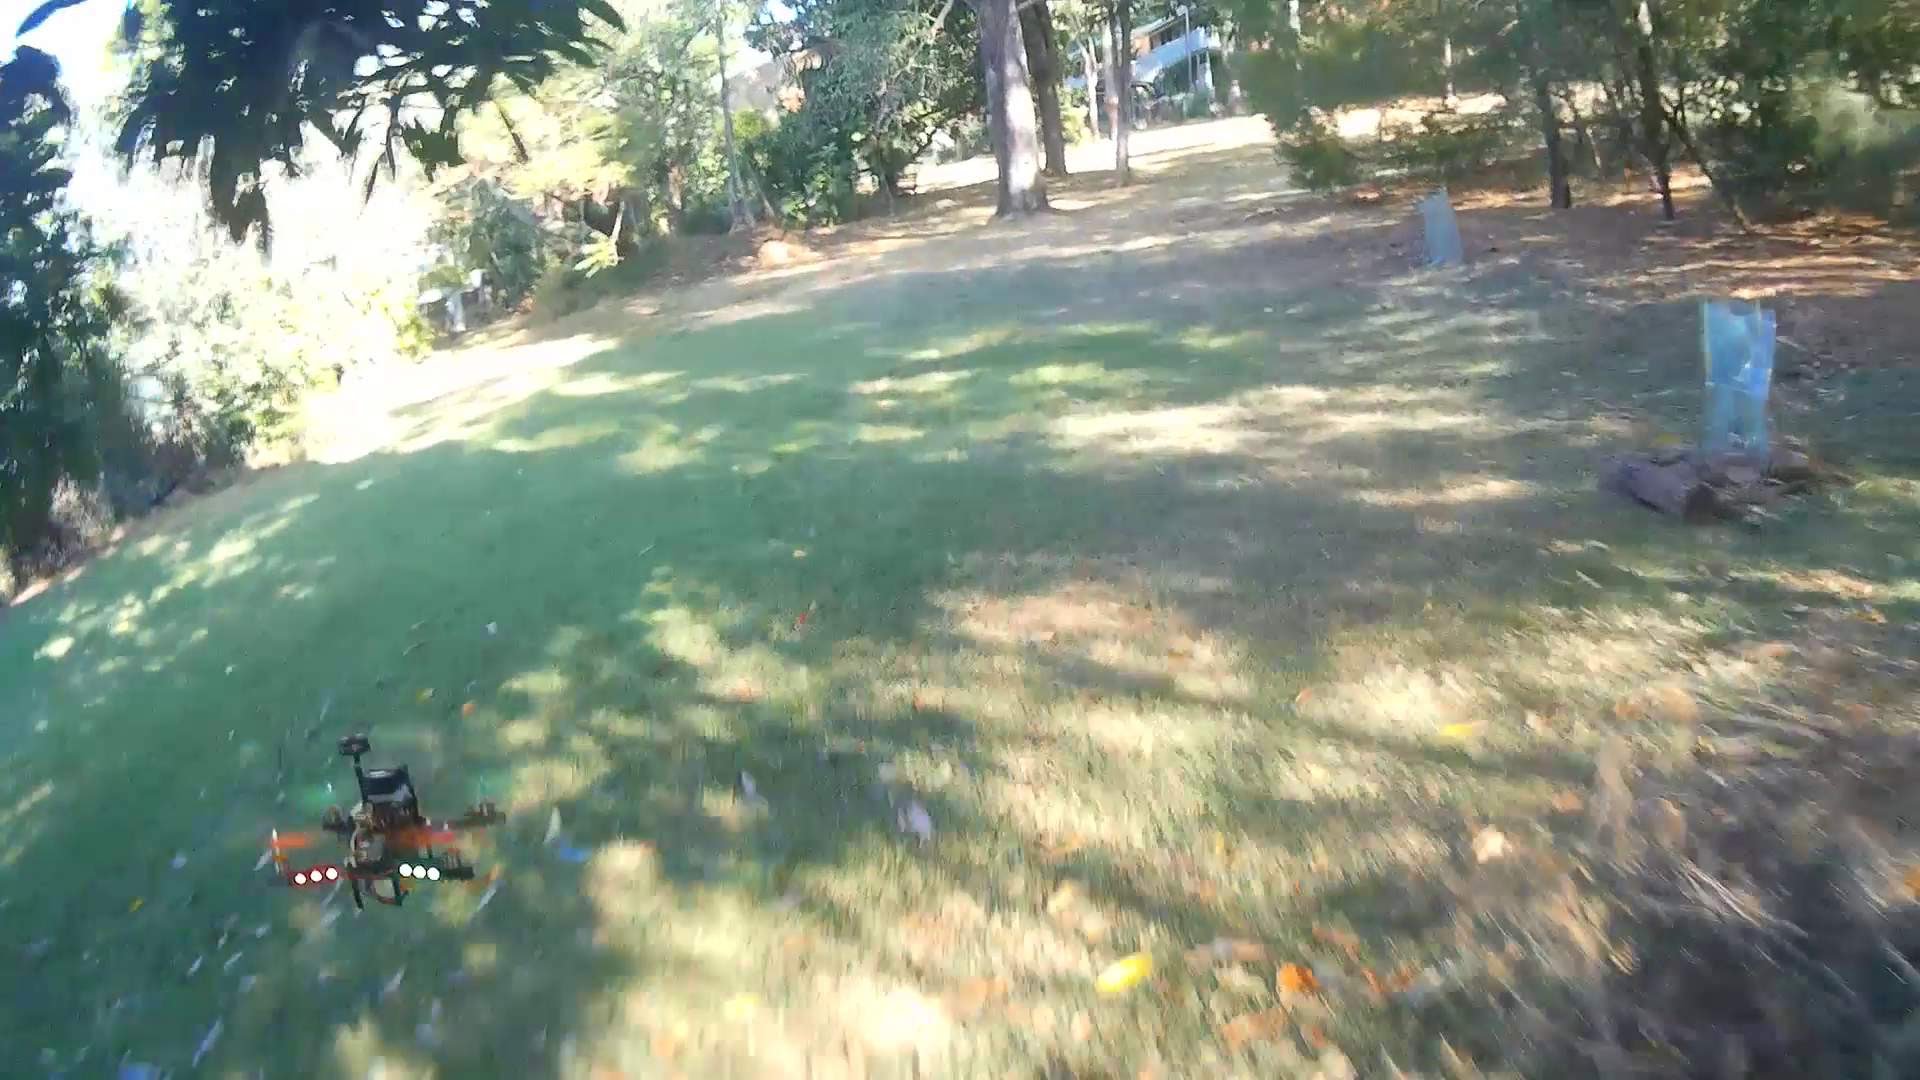 Mini Quadcopter FPV Action (Pioneering Drone “Racing”)